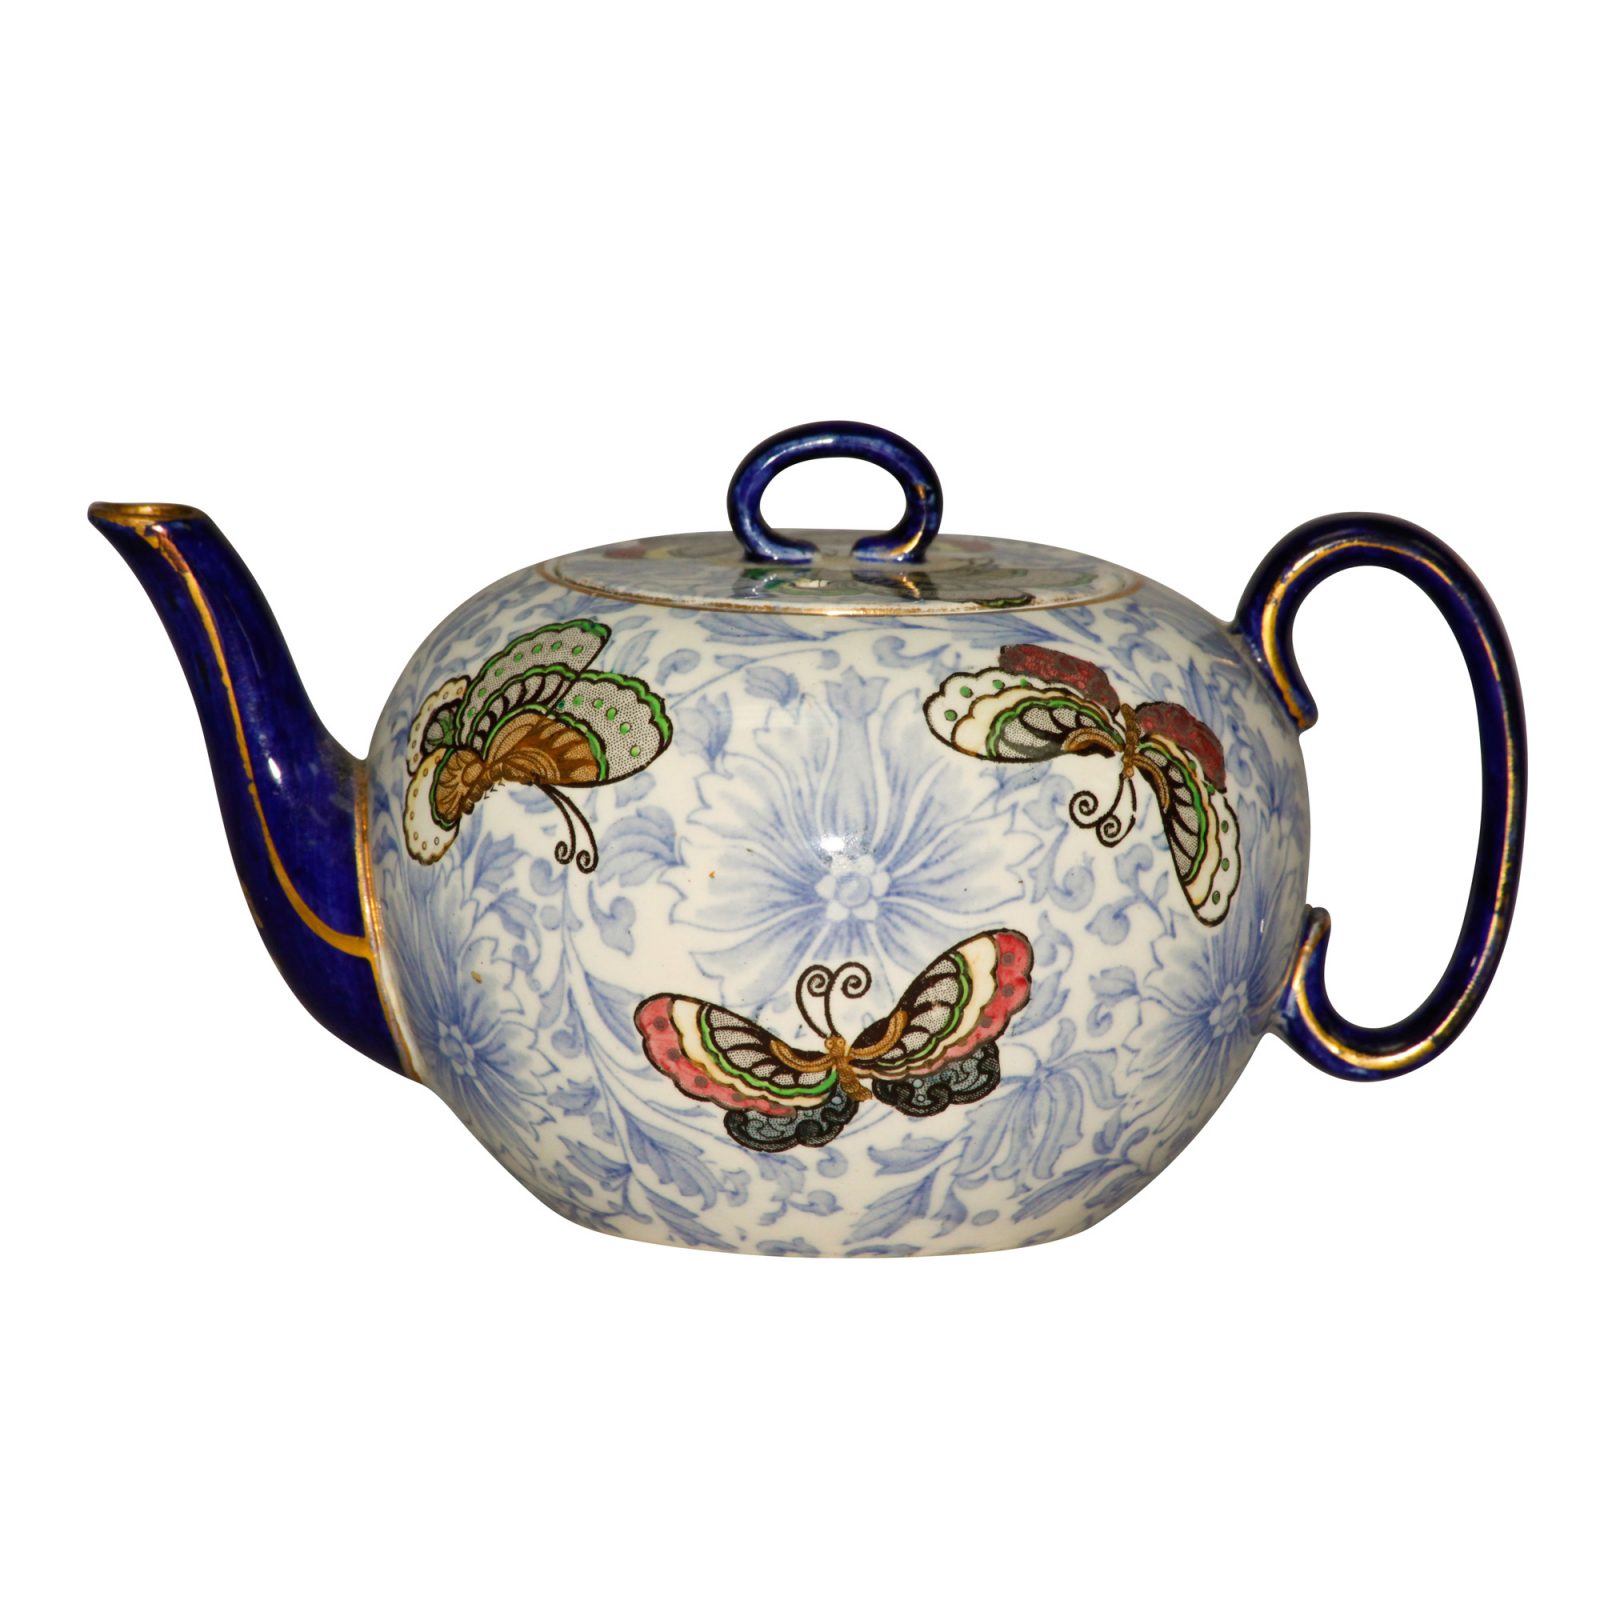 Teapot "Flowers and Butterflies" - Royal Doulton Seriesware